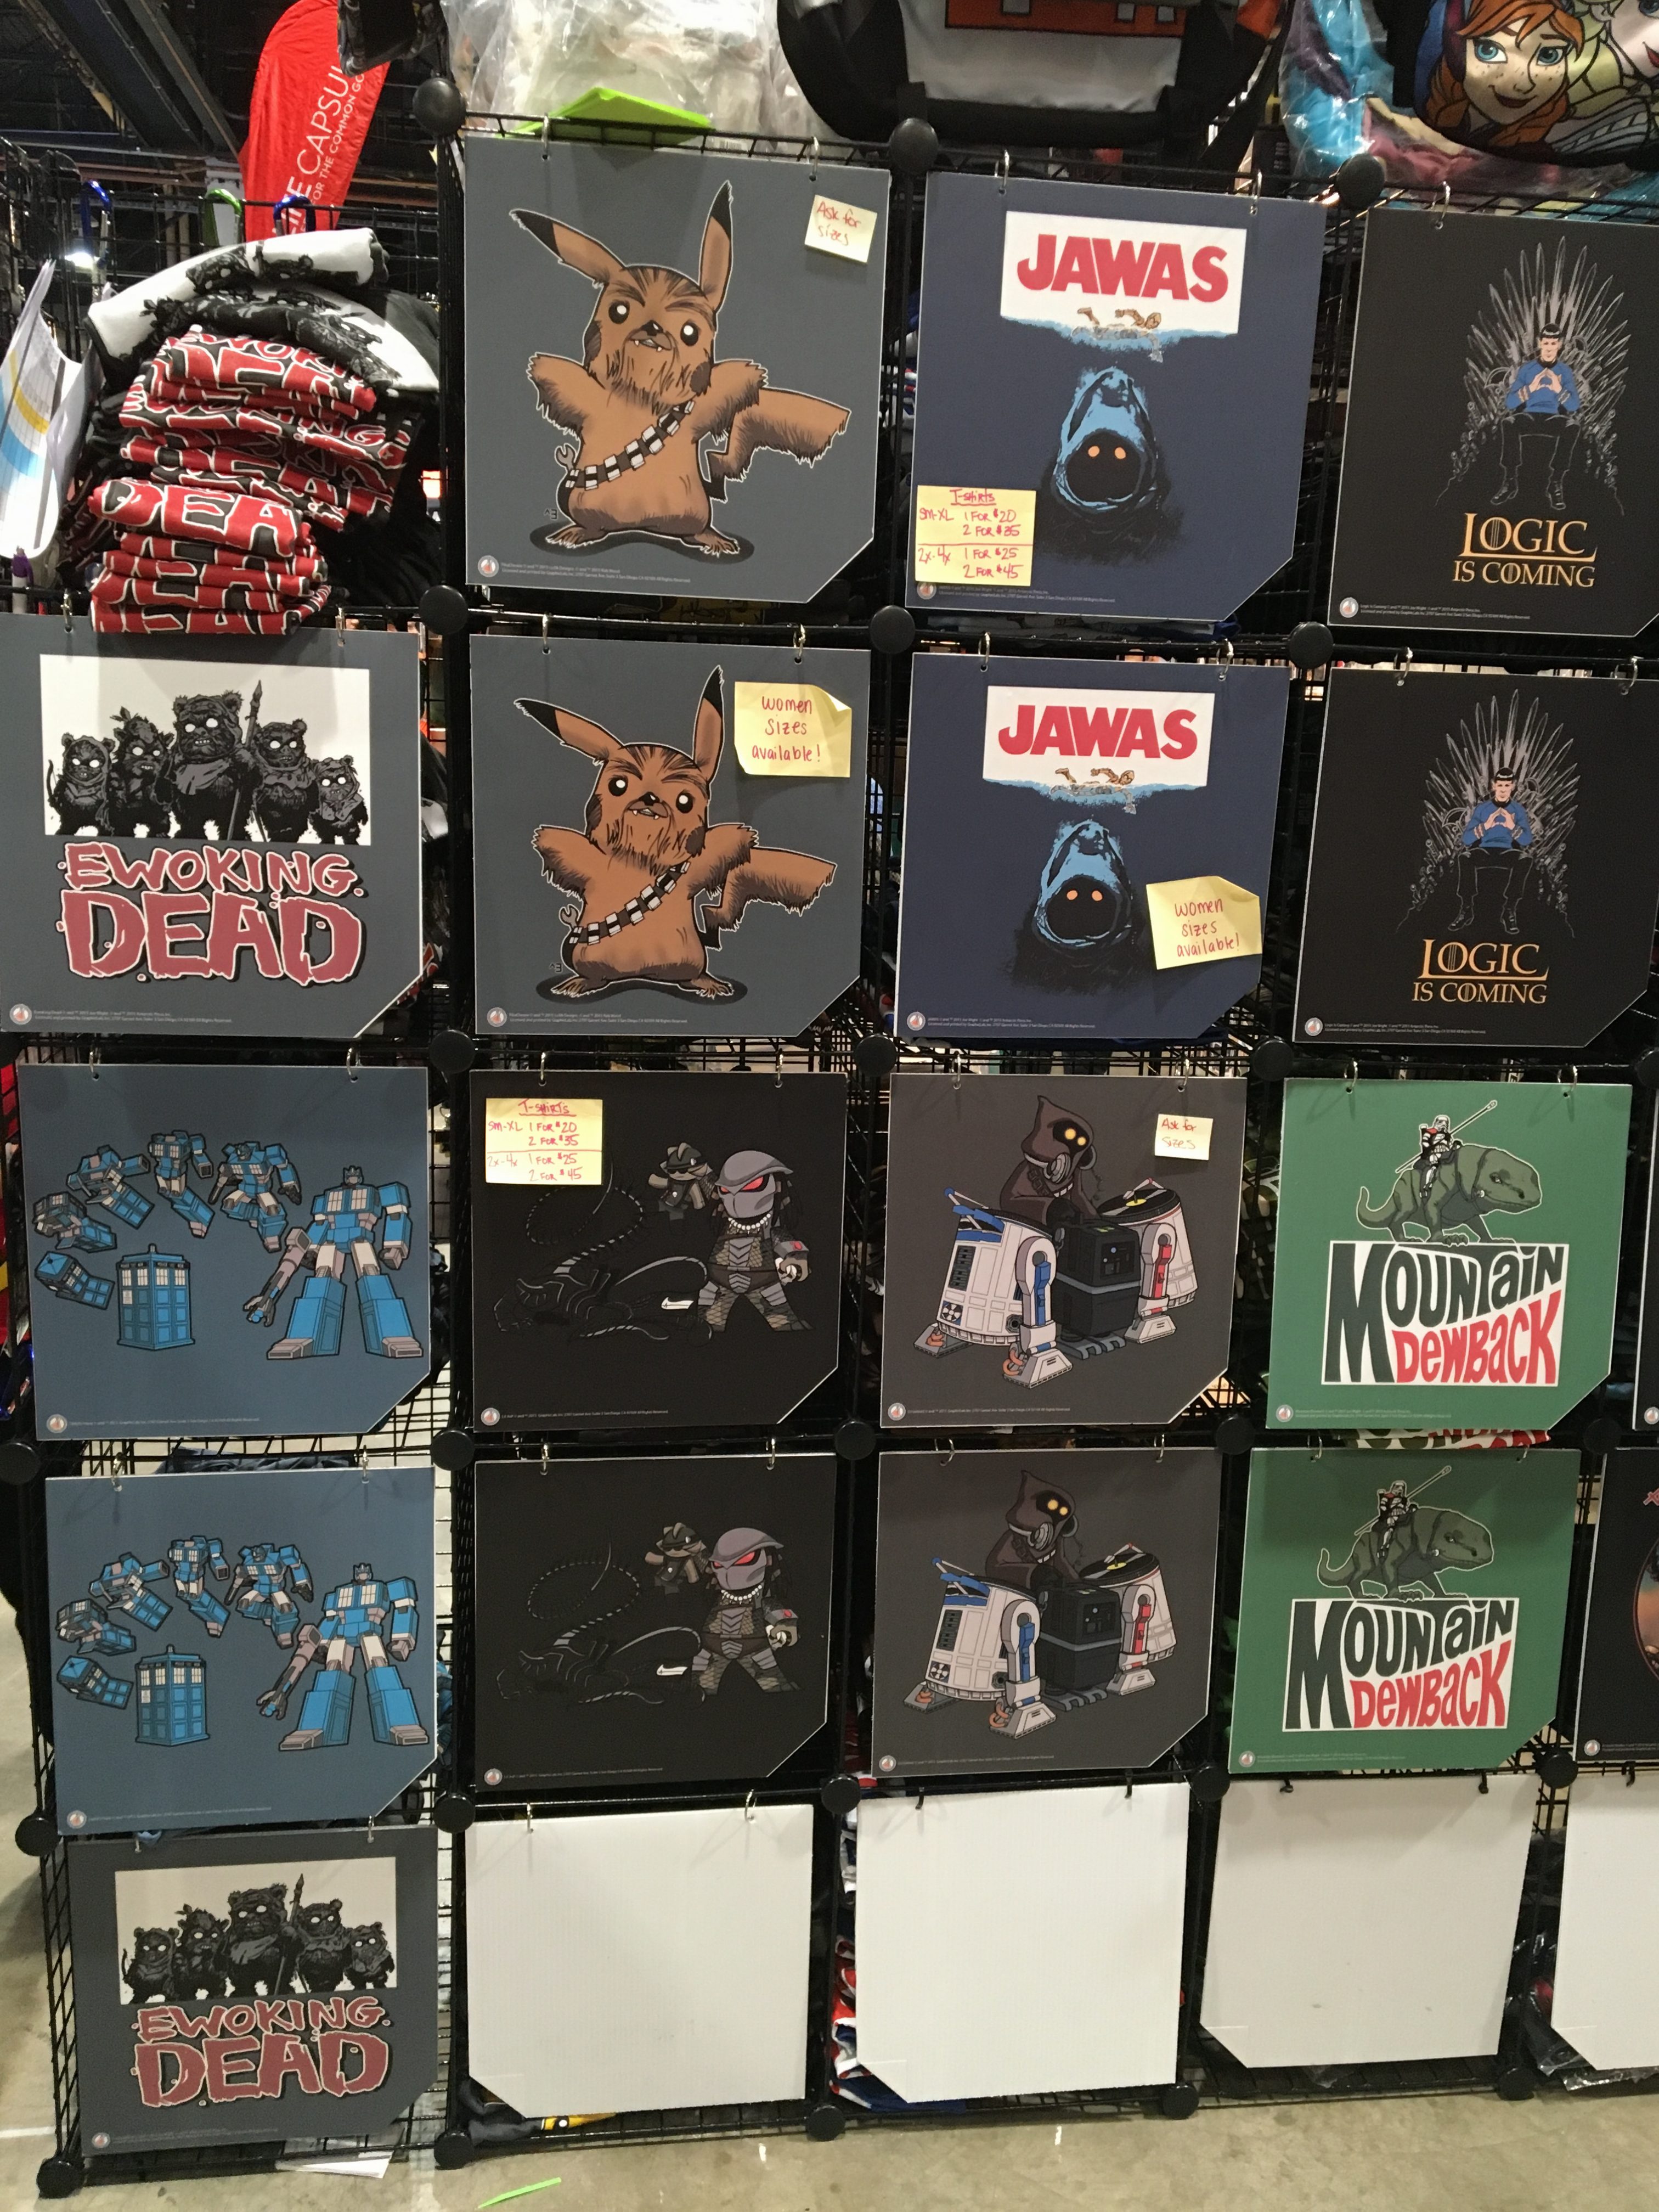 A small sampling of the many different types of shirts on sale